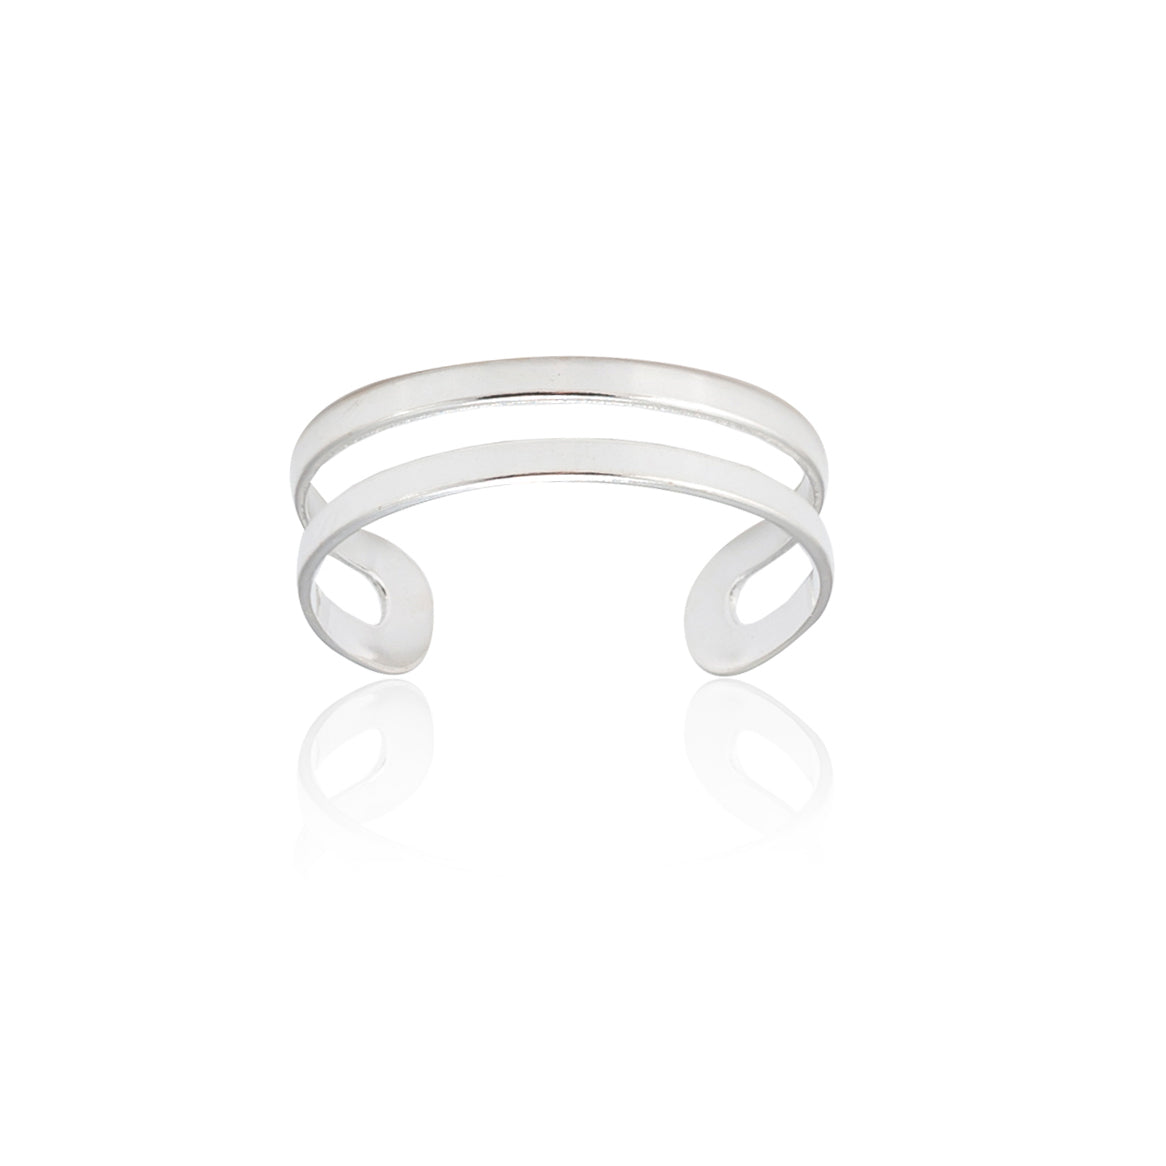 INEL ARGINT 925 LINES rings > silver ring > gifts for her > gifts for girls > gifts for moms > gifts for best friend > birthday gift Maison la Stephanie   